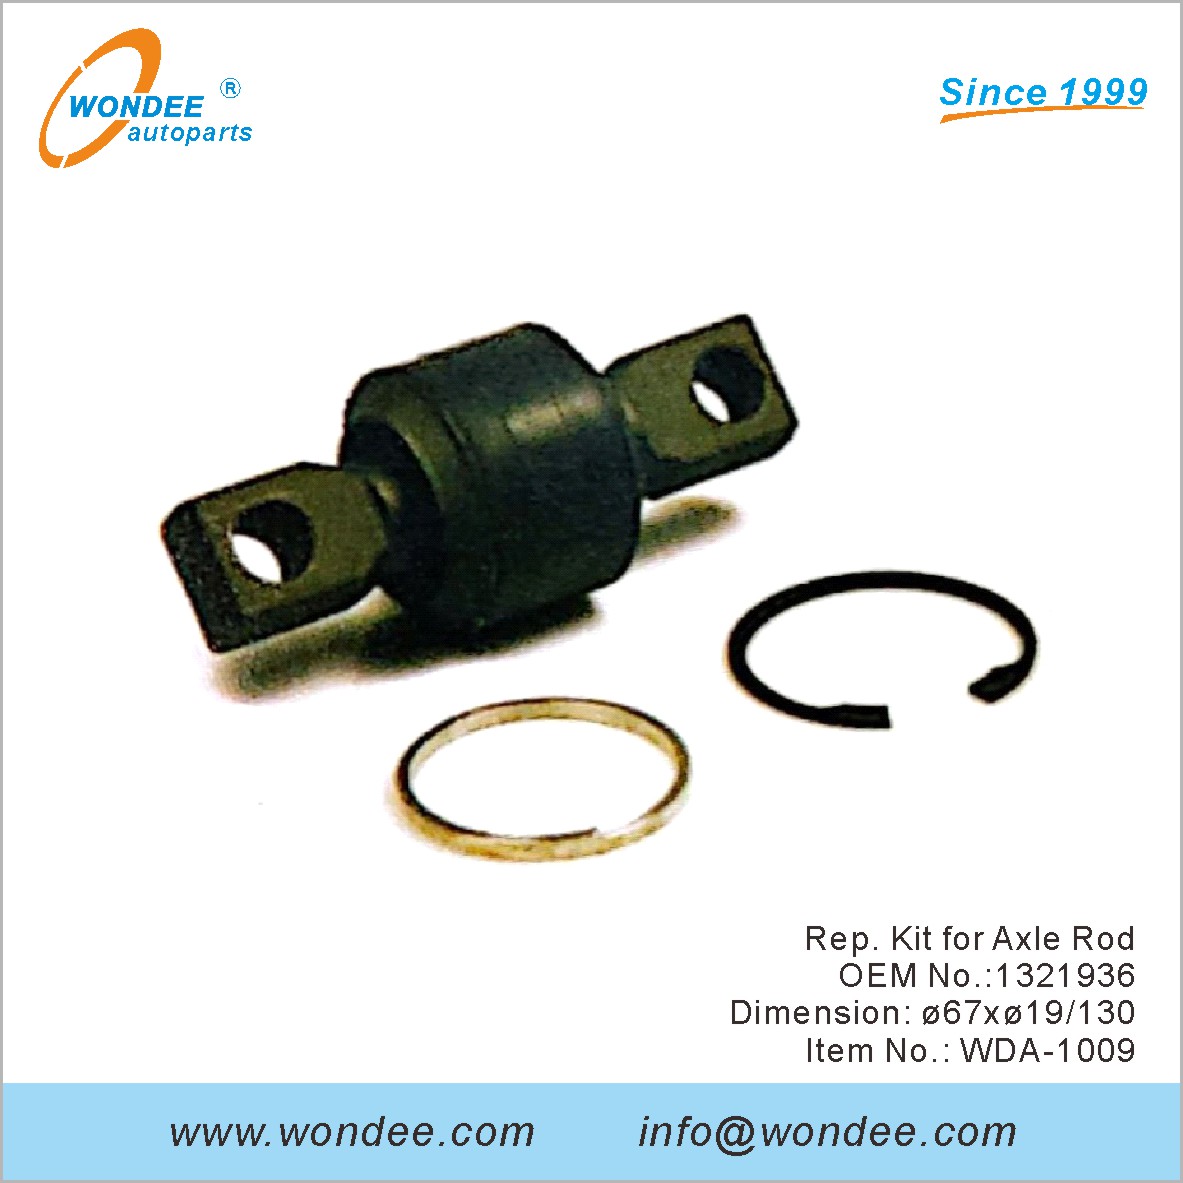 Rep. Kit for Axle Rod OEM 1321936 for DAF from WONDEE